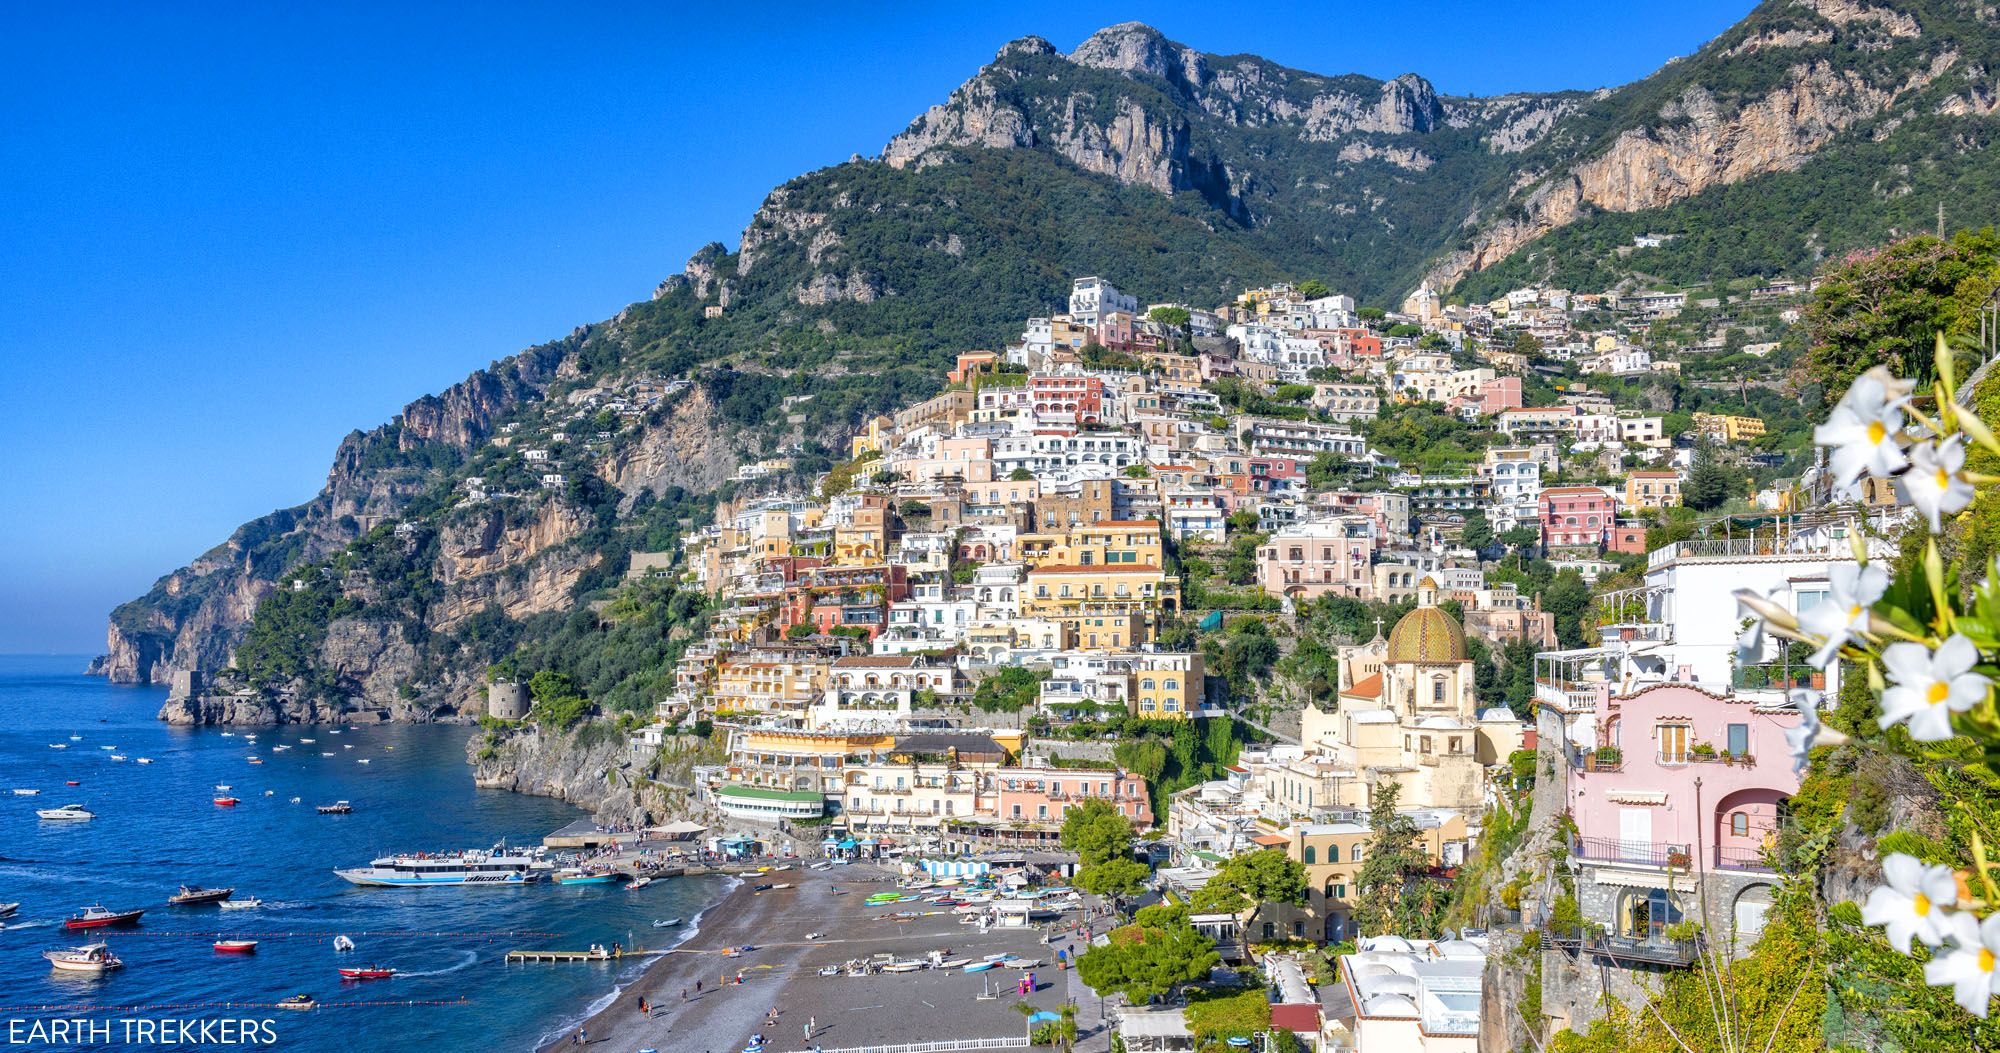 Featured image for “Top 10 Things to Do in Positano, Amalfi Coast, Italy”